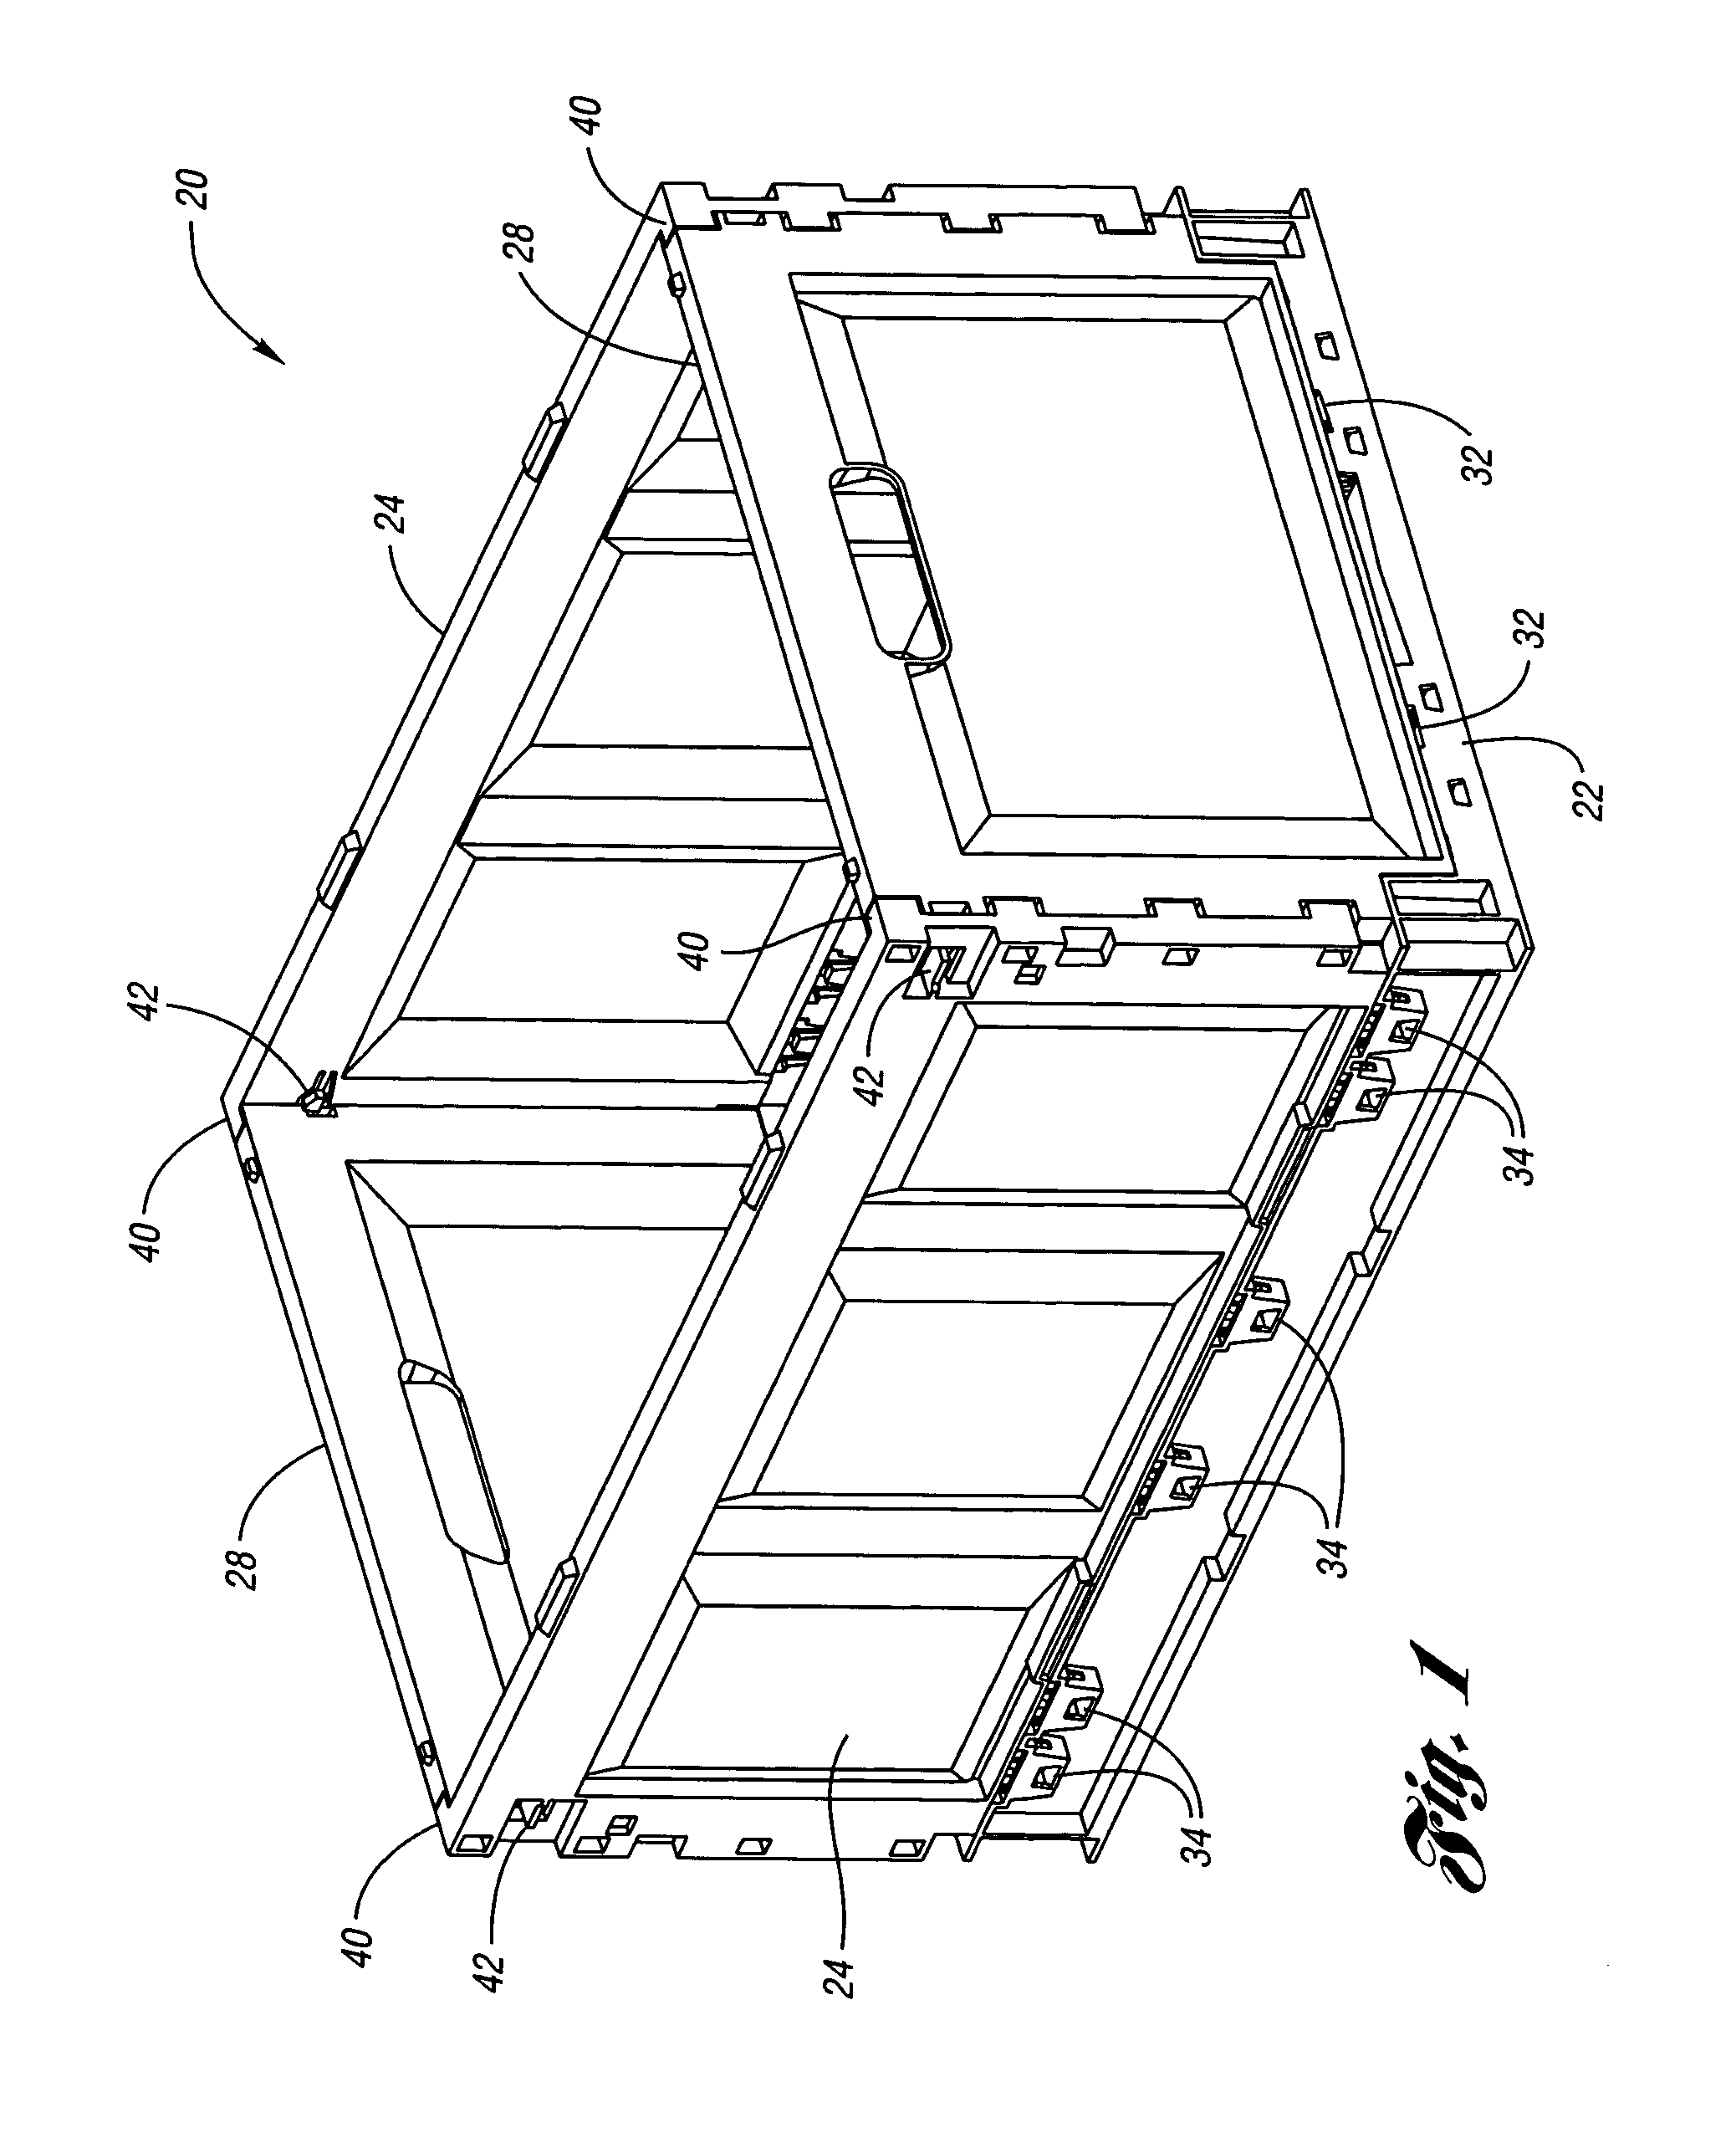 Collapsible container with side wall latching capability